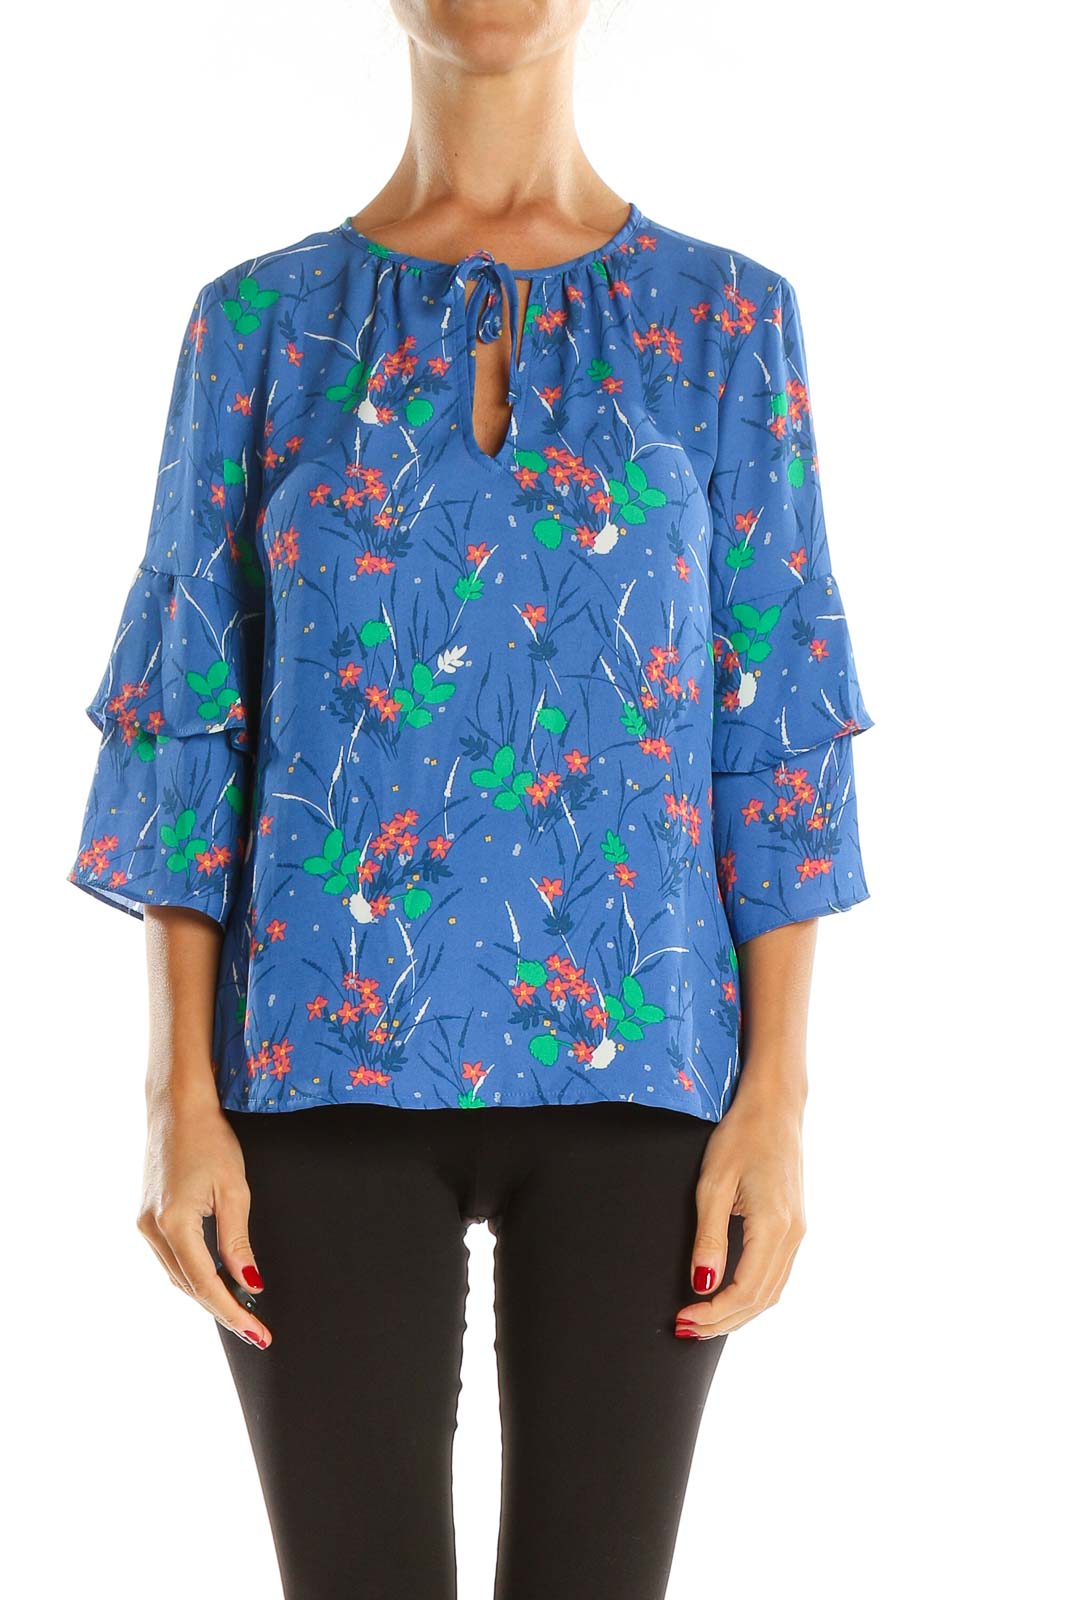 Blue Printed Chic Blouse Front